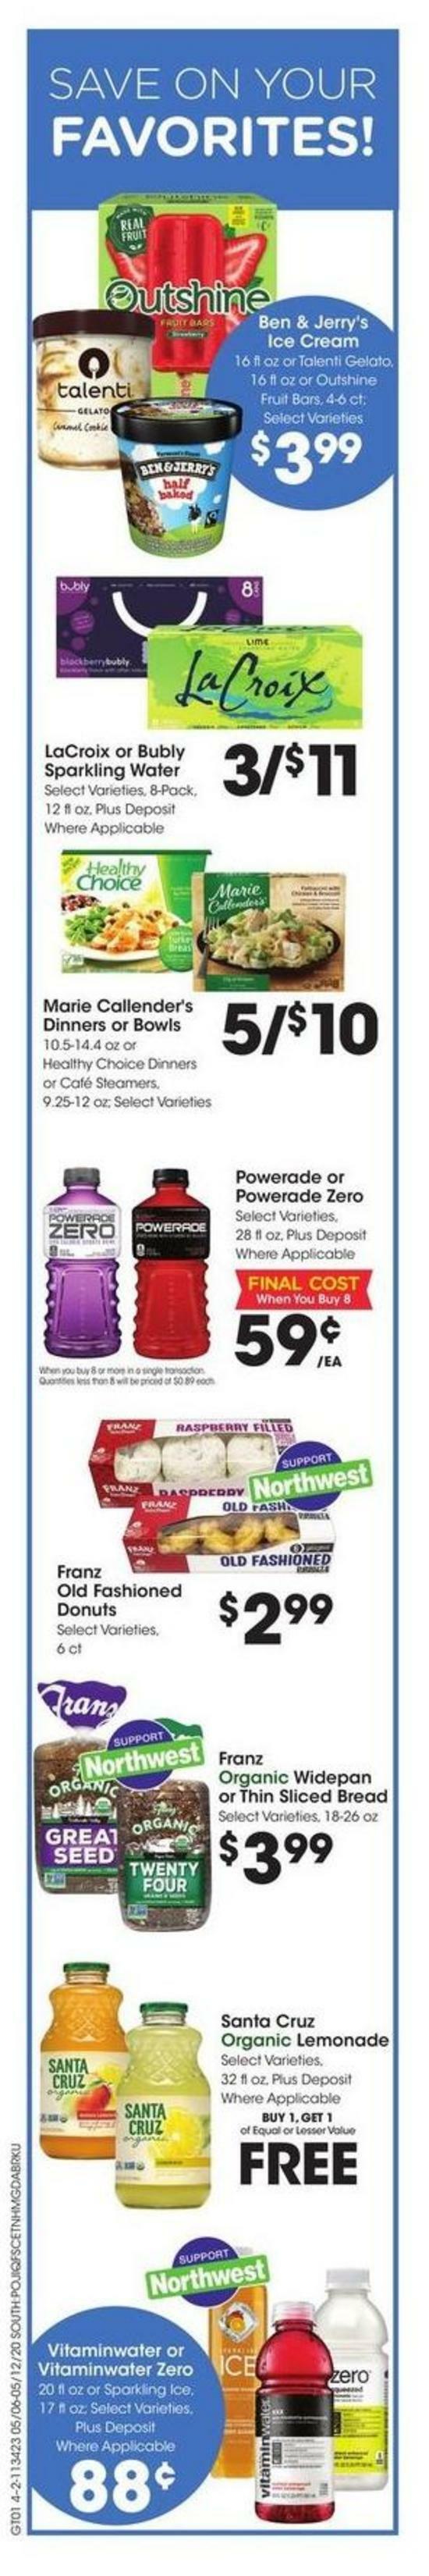 Fred Meyer Weekly Ad from May 6